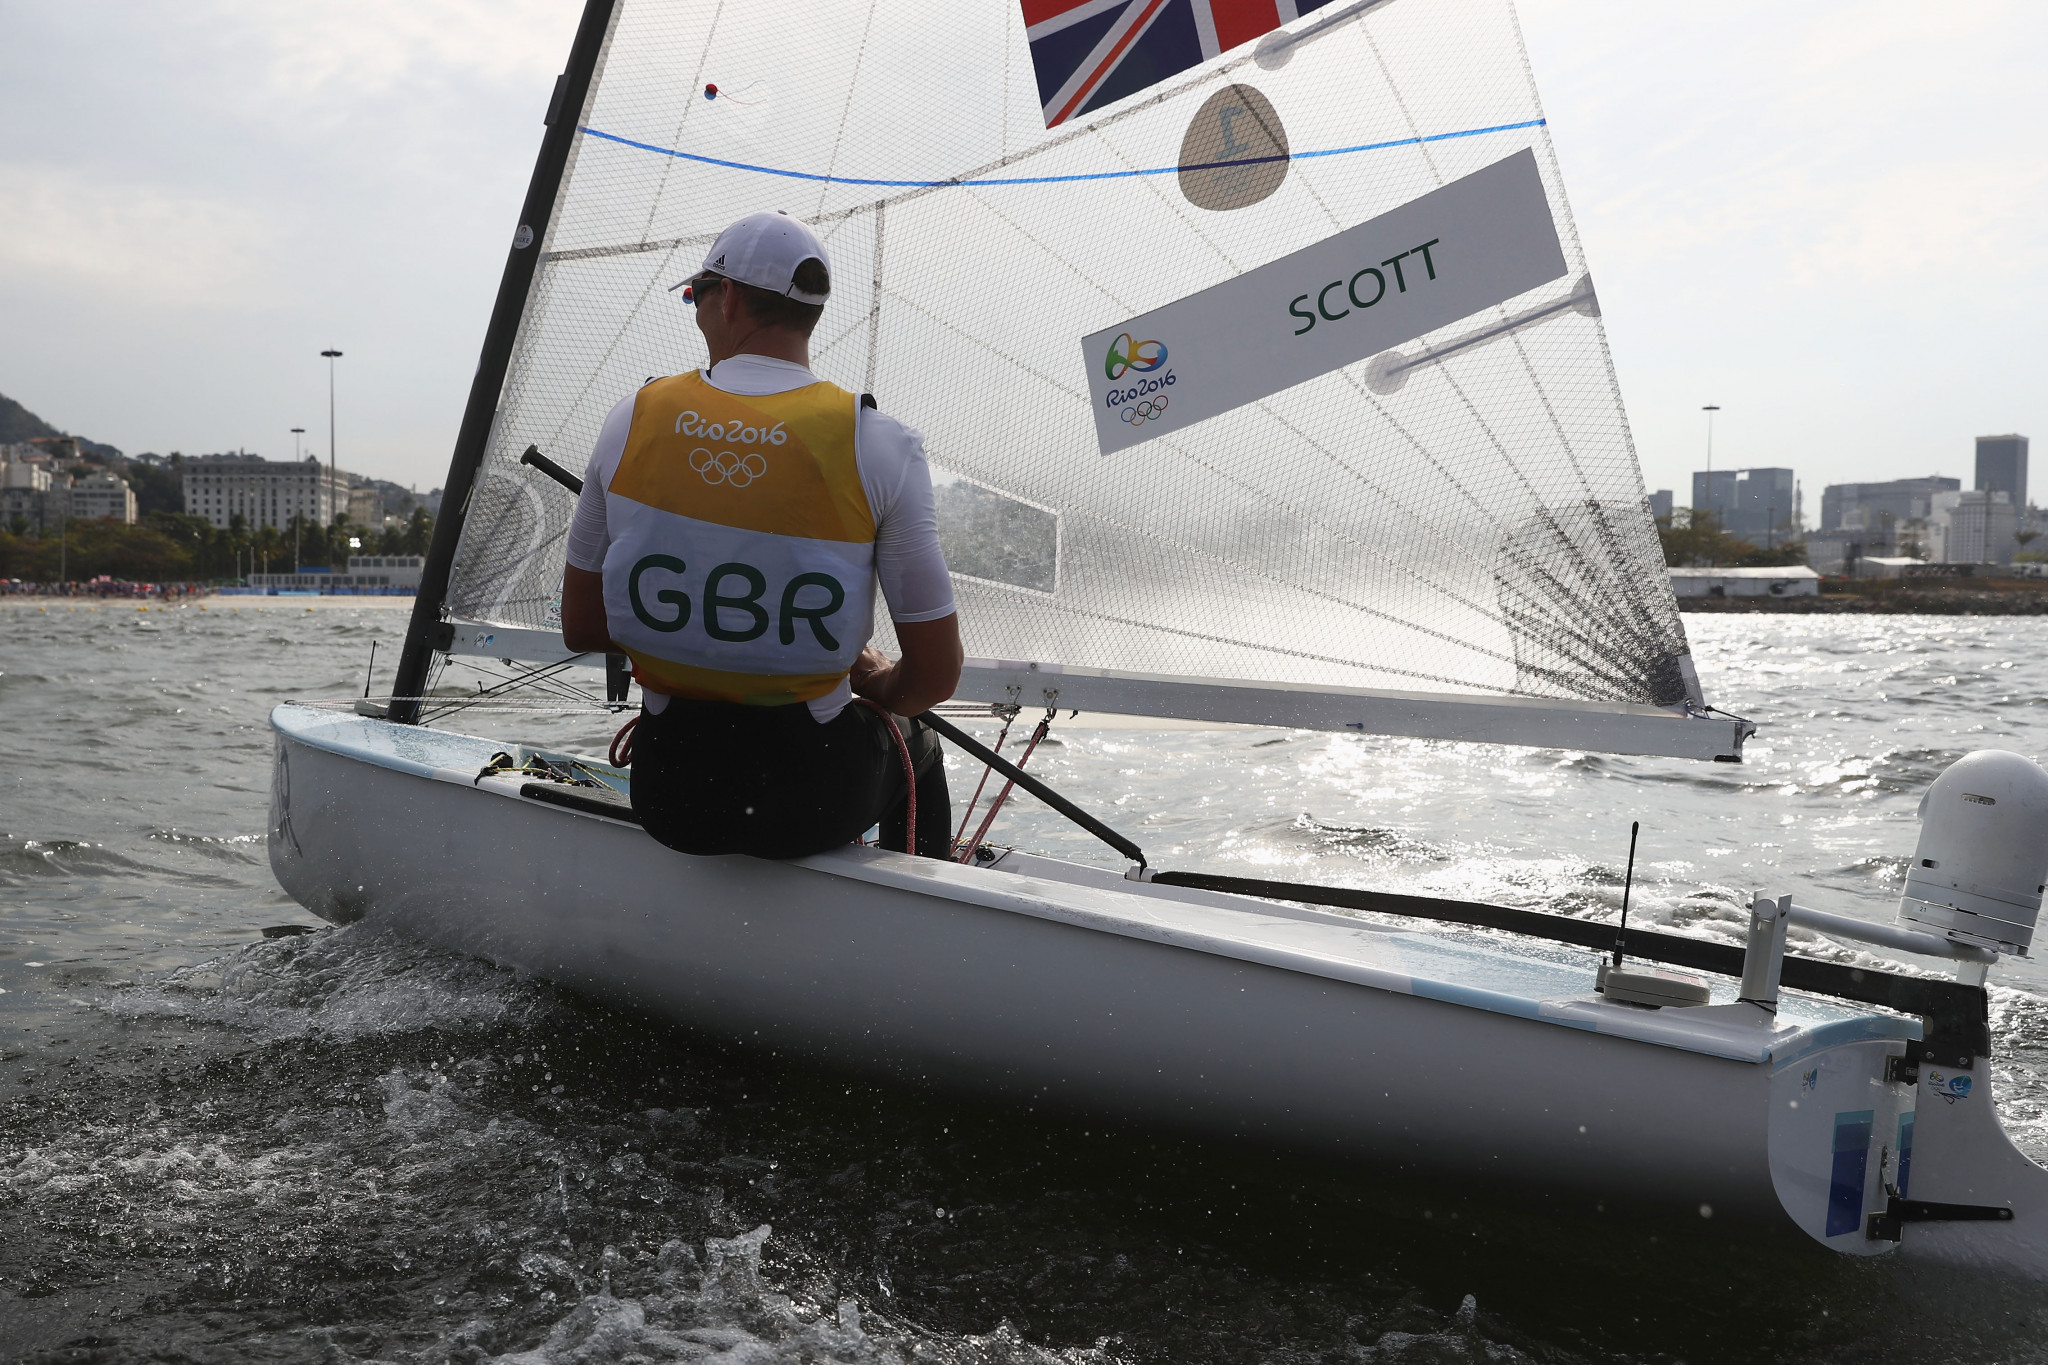 Rio 2016 champion Giles Scott of Britain currently sits in second place in the standings at the Finn European Open in Vilamoura  ©Getty Images